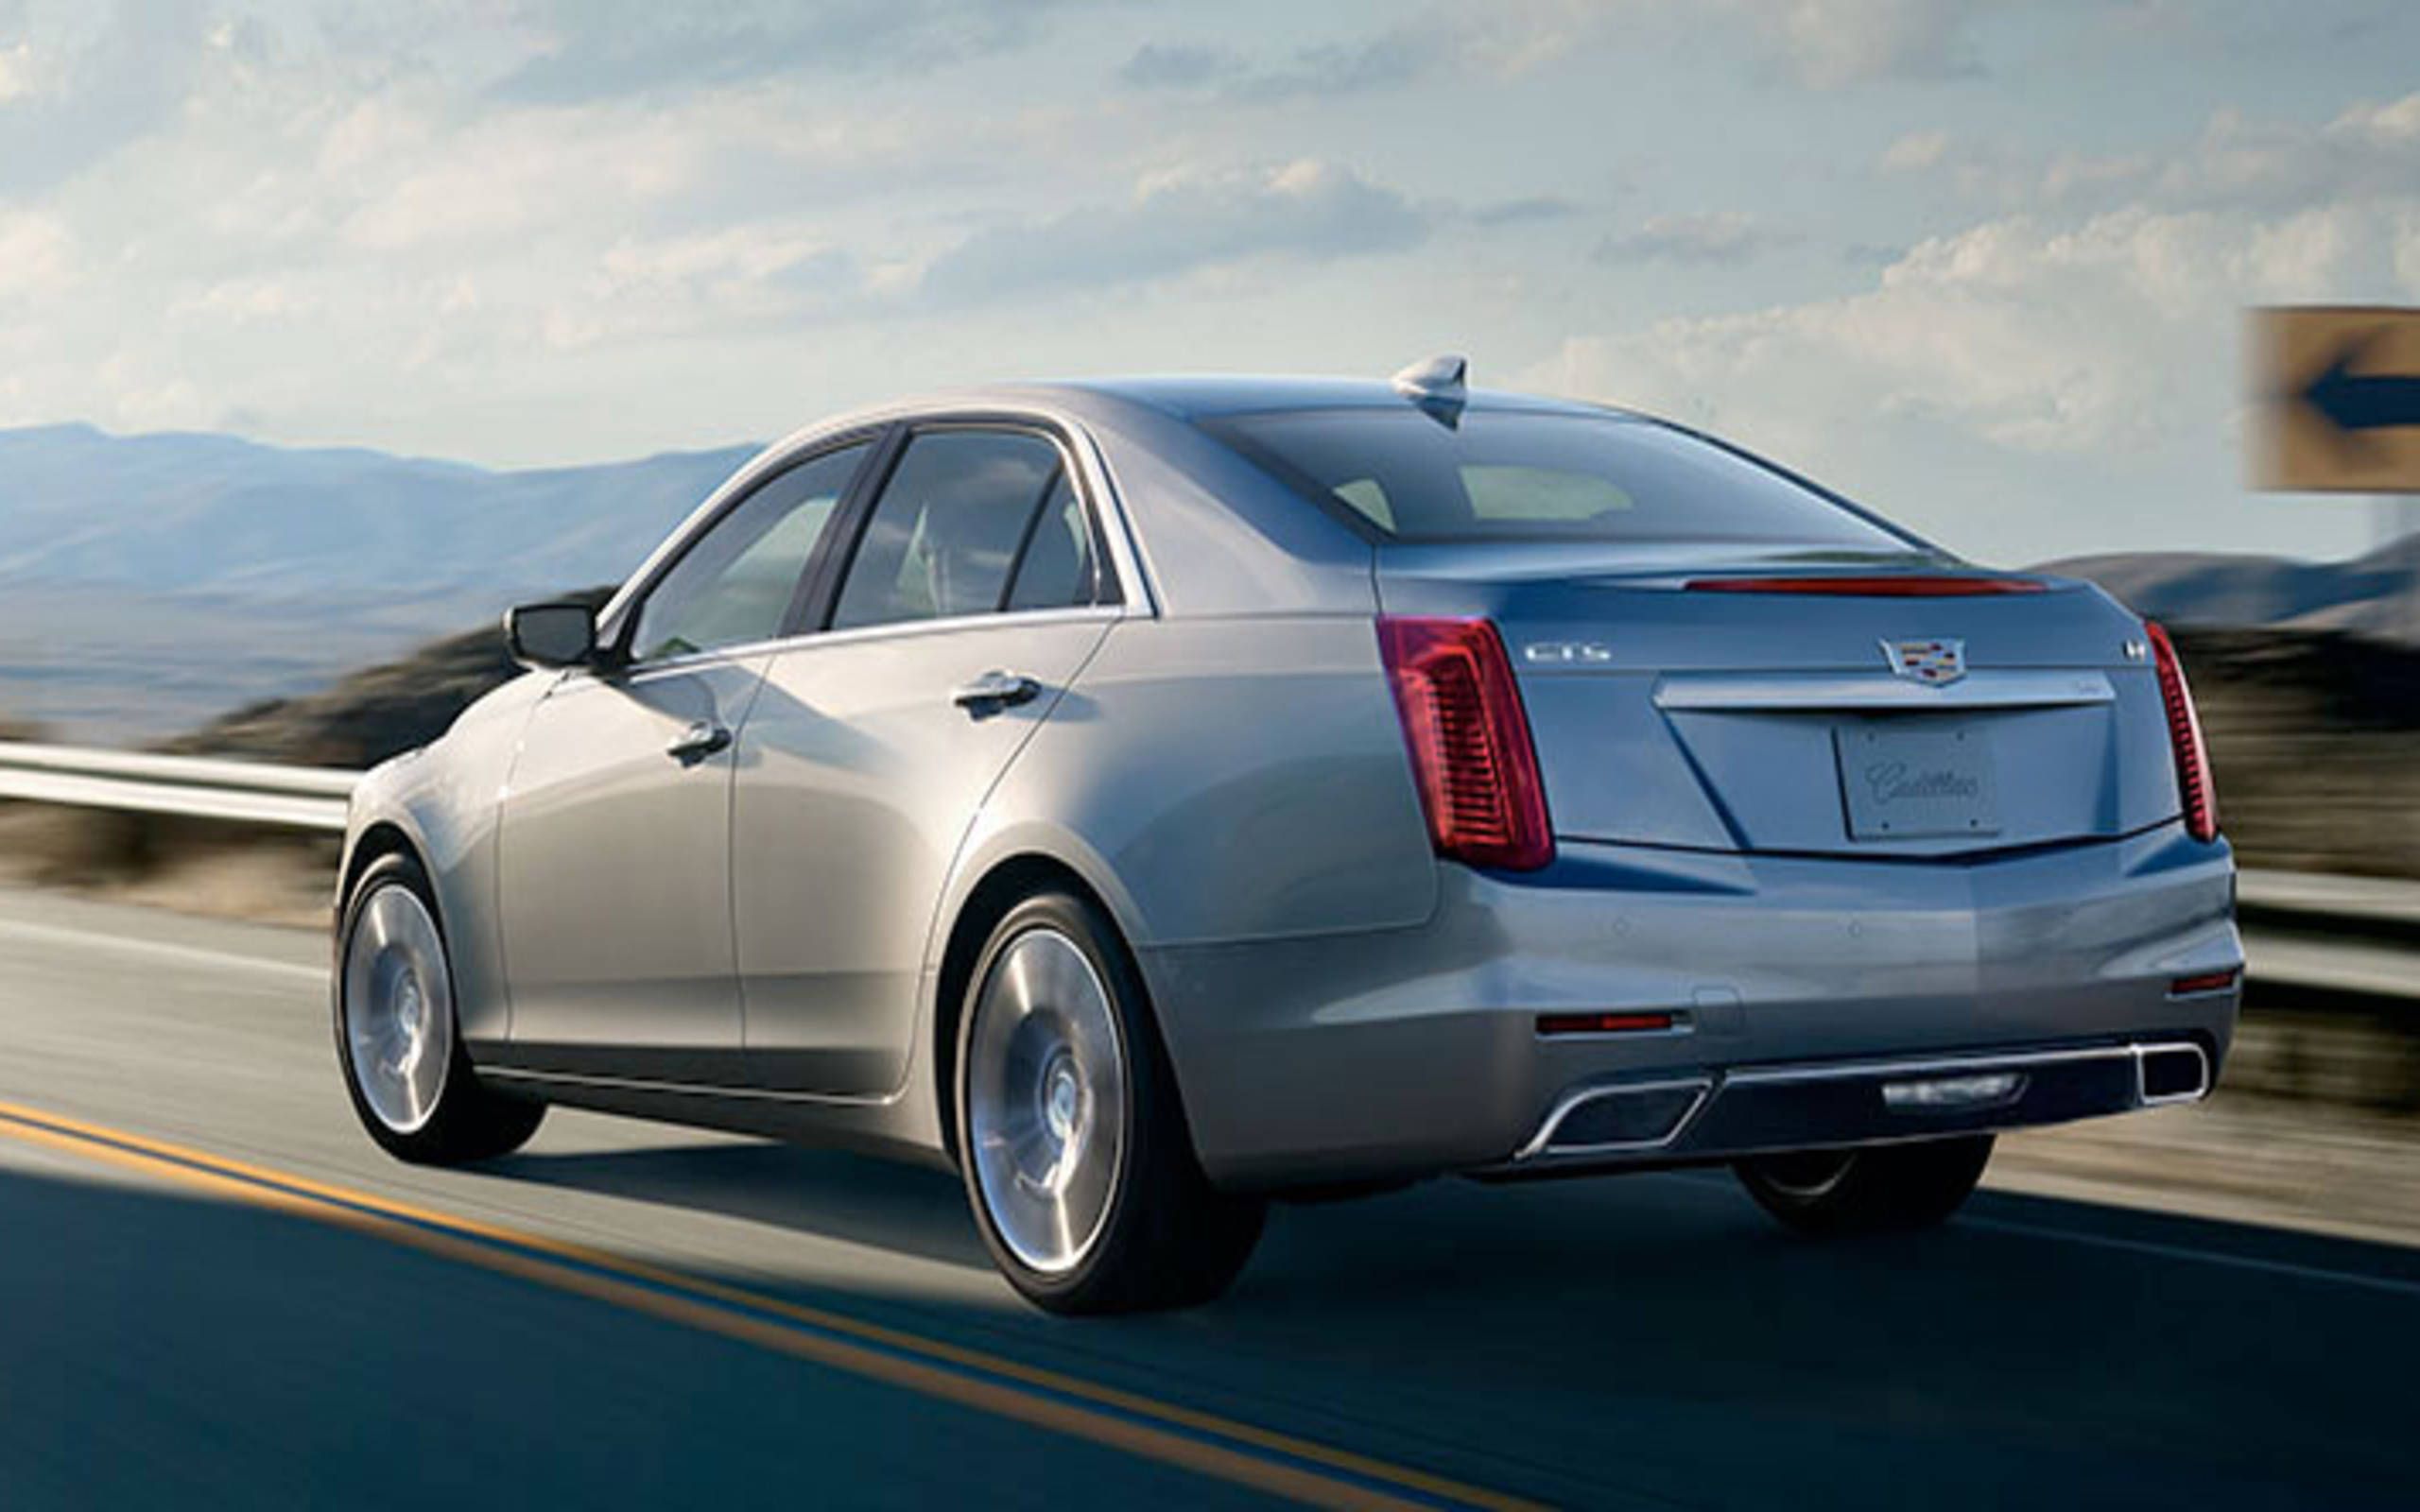 2016 Cadillac CTS AWD review notes: Near perfect, but ...